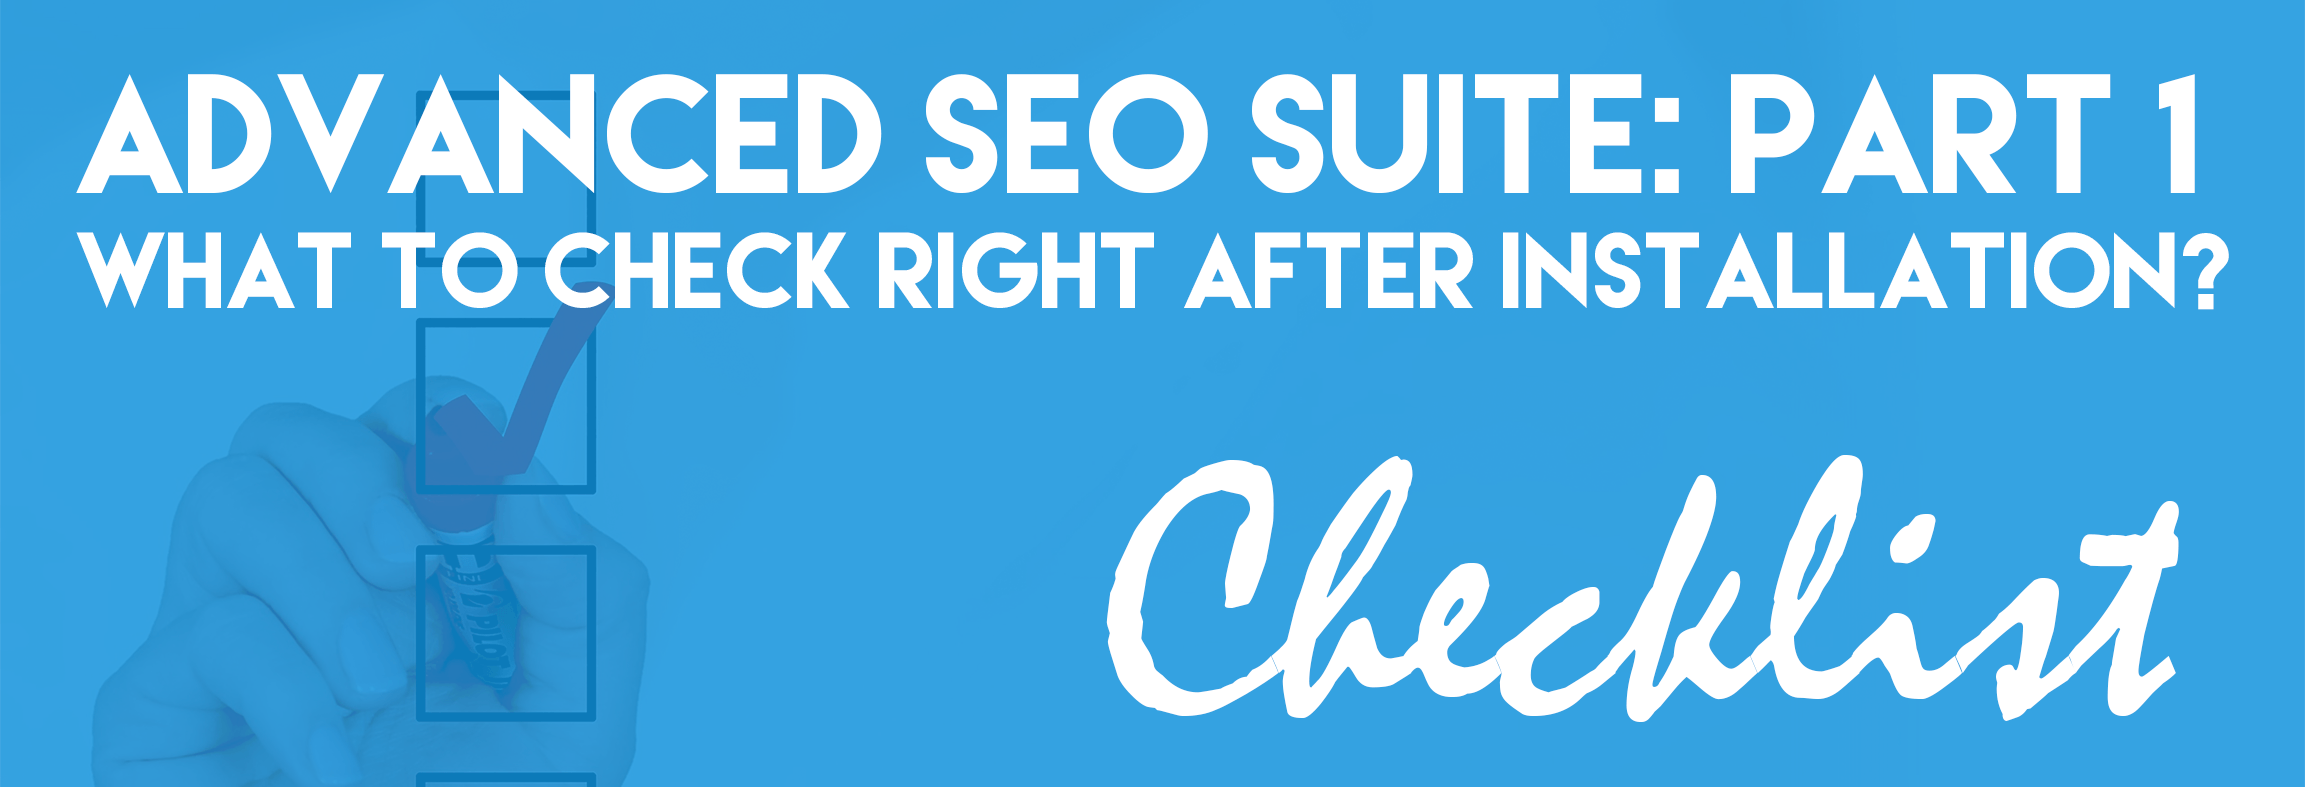 Advanced SEO Suite Onboarding Checklist (Part 1): What To Check Right After Installation?